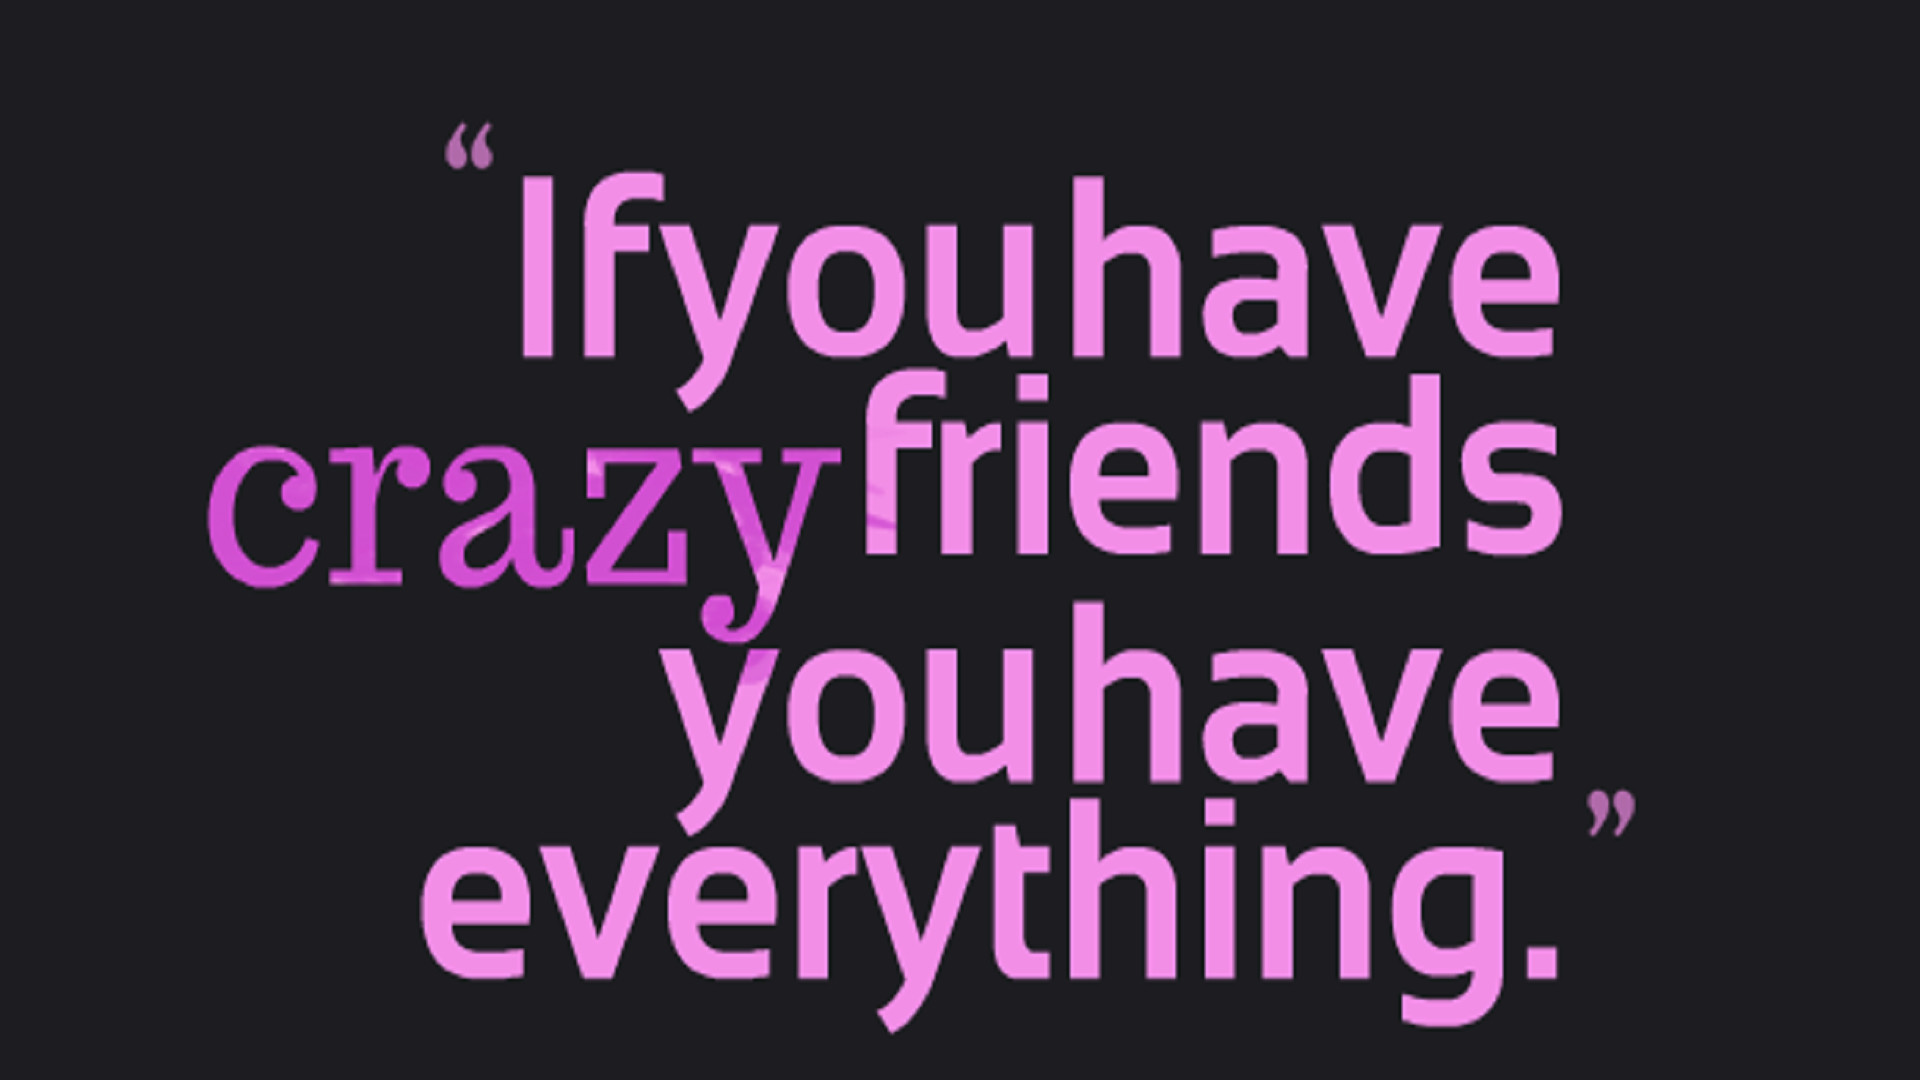 Funny Quotes For Friends Pictures Free Hd Wallpapers - Quotation -  1920x1080 Wallpaper 